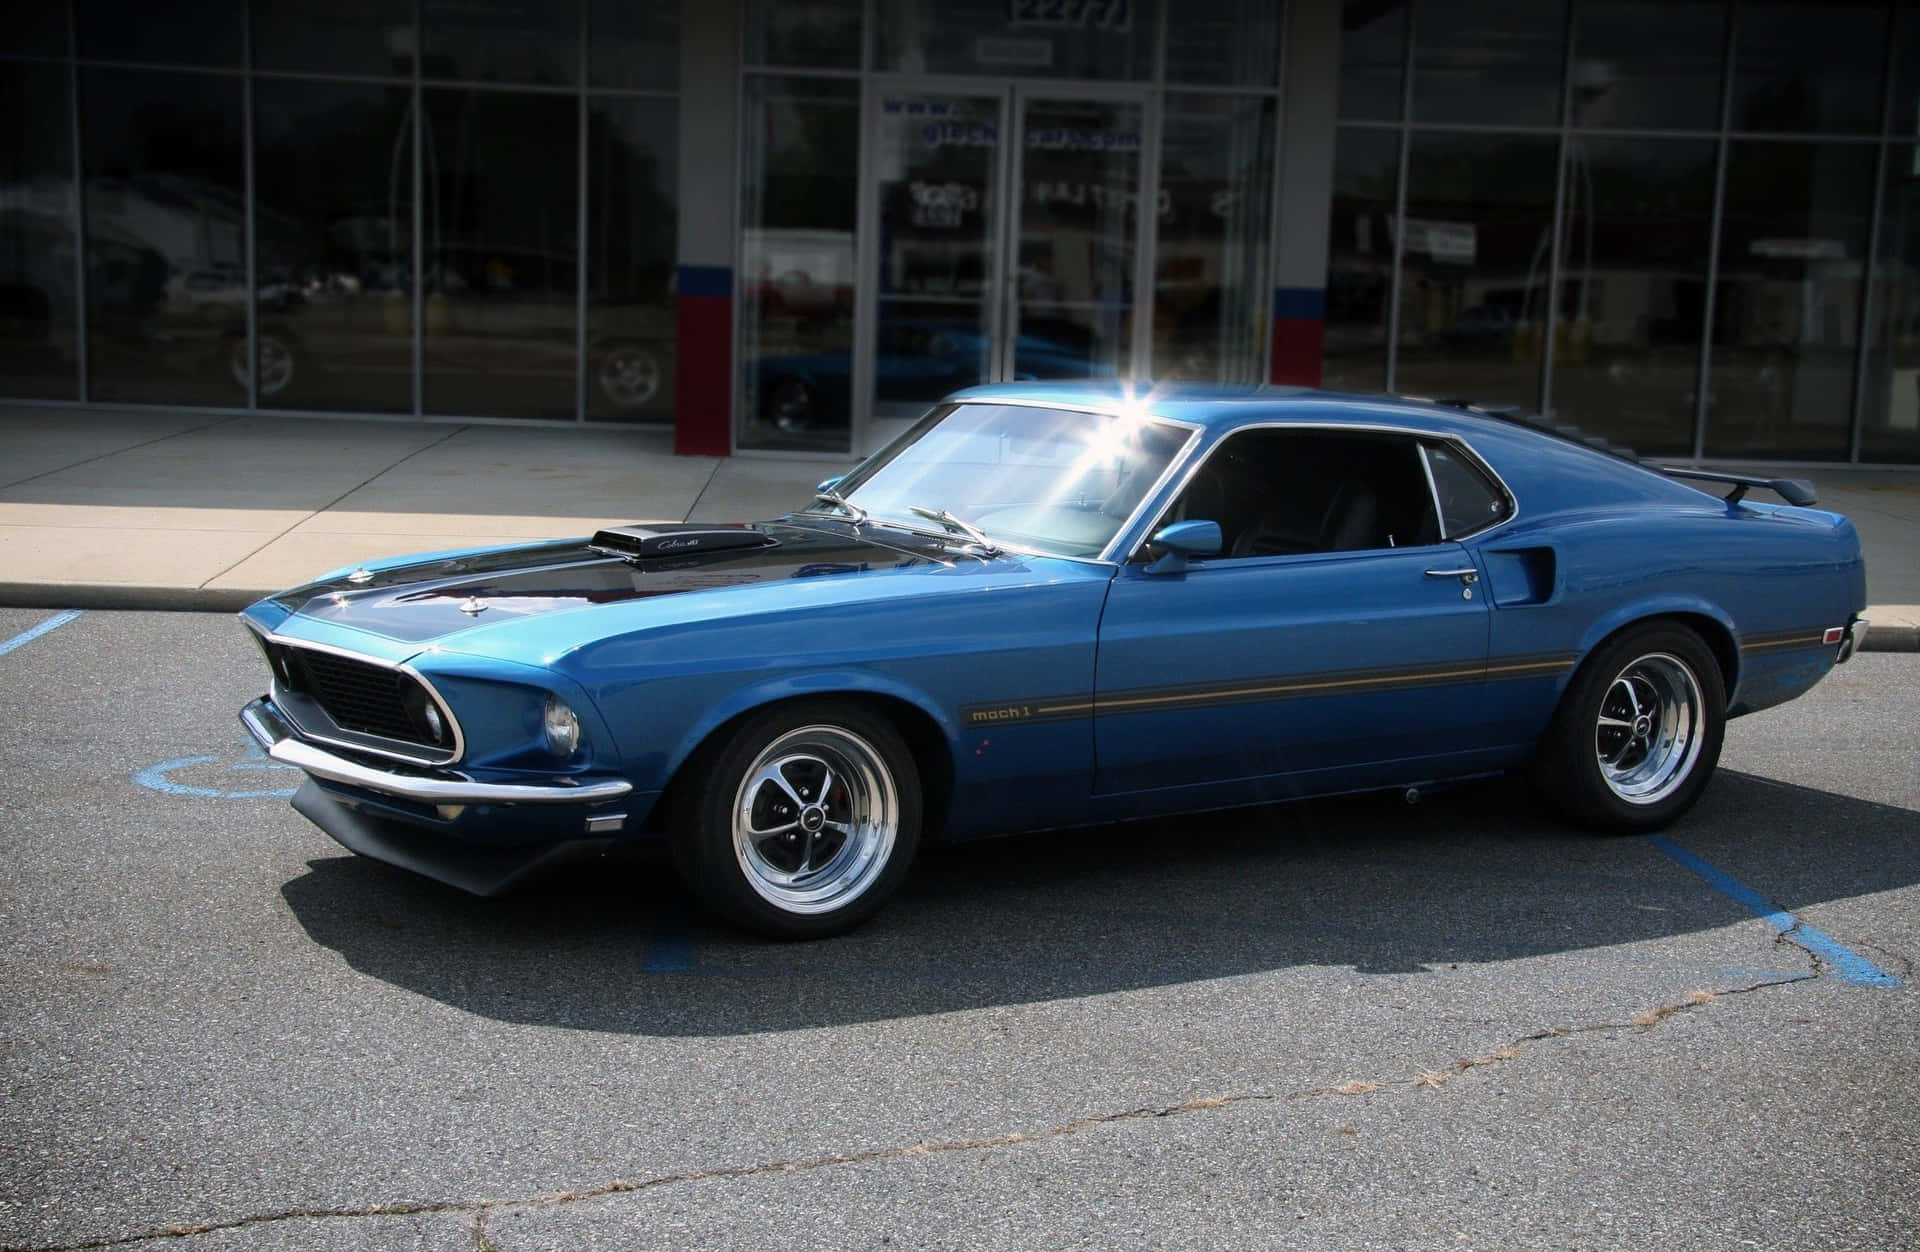 Ford Mustang Mach 1 dominating the road with its astounding design and unmatched performance. Wallpaper